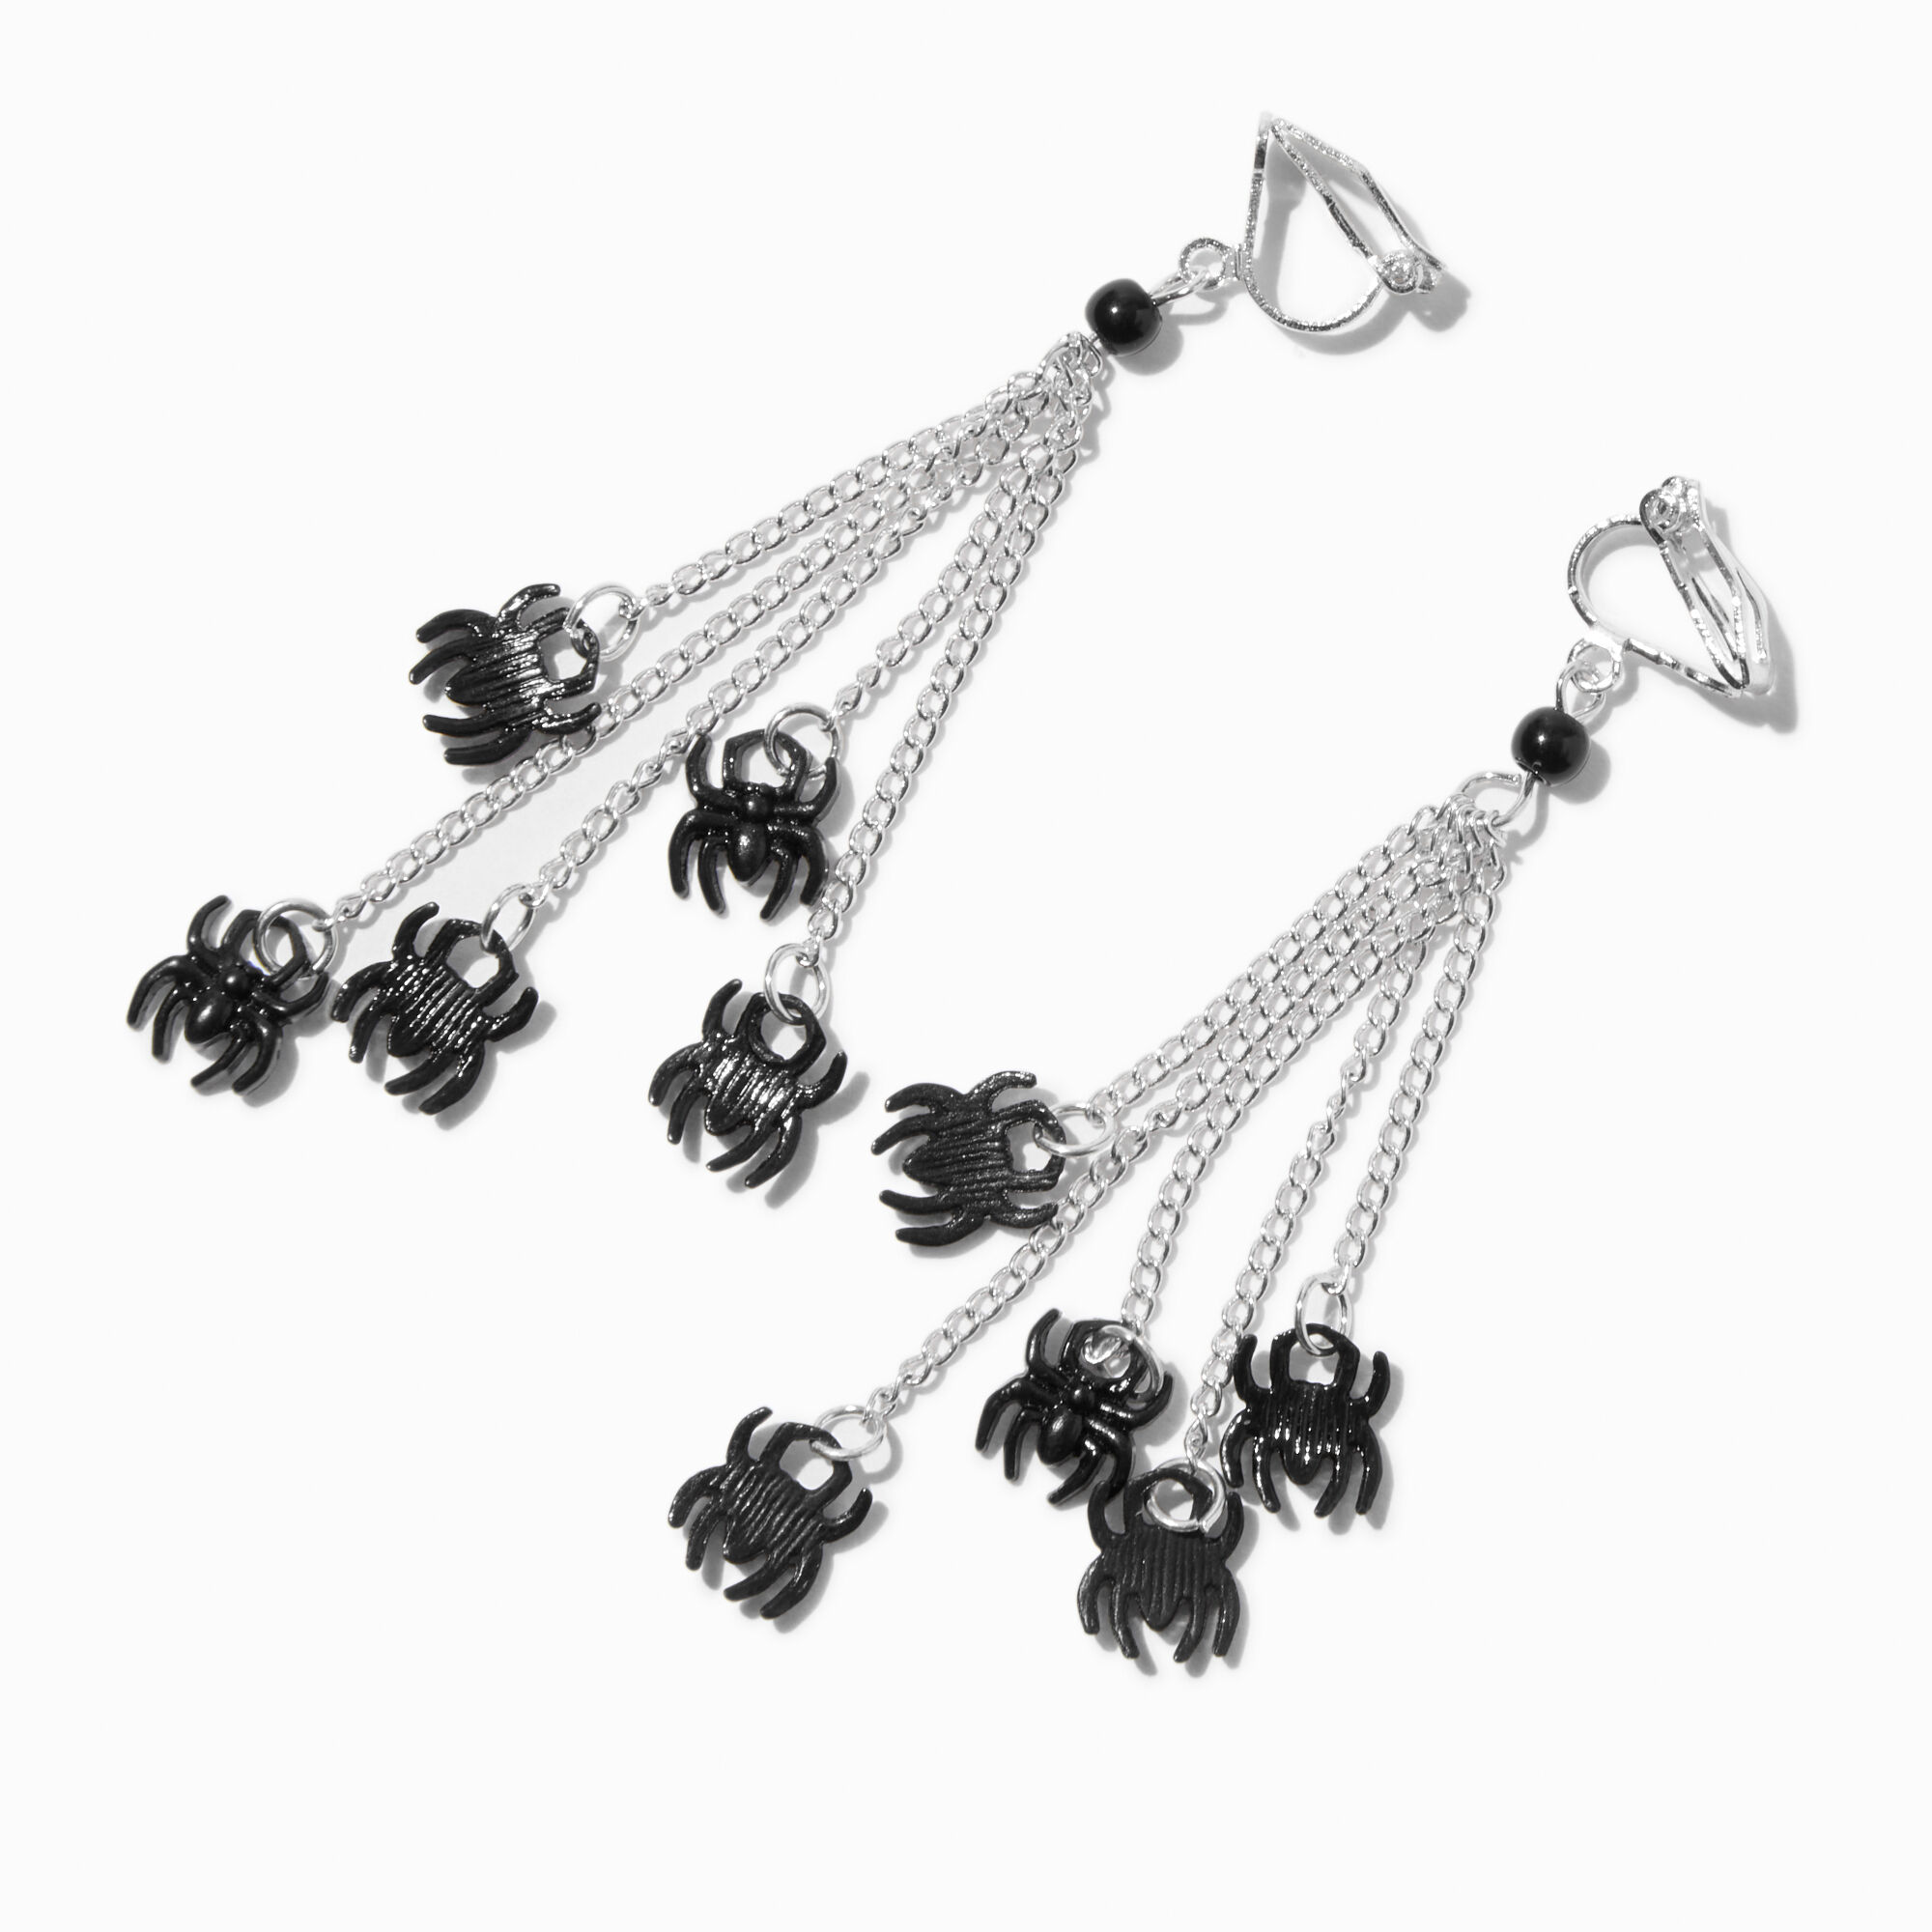 View Claires Spiders Webs 3 Chain ClipOn Drop Earrings Black information